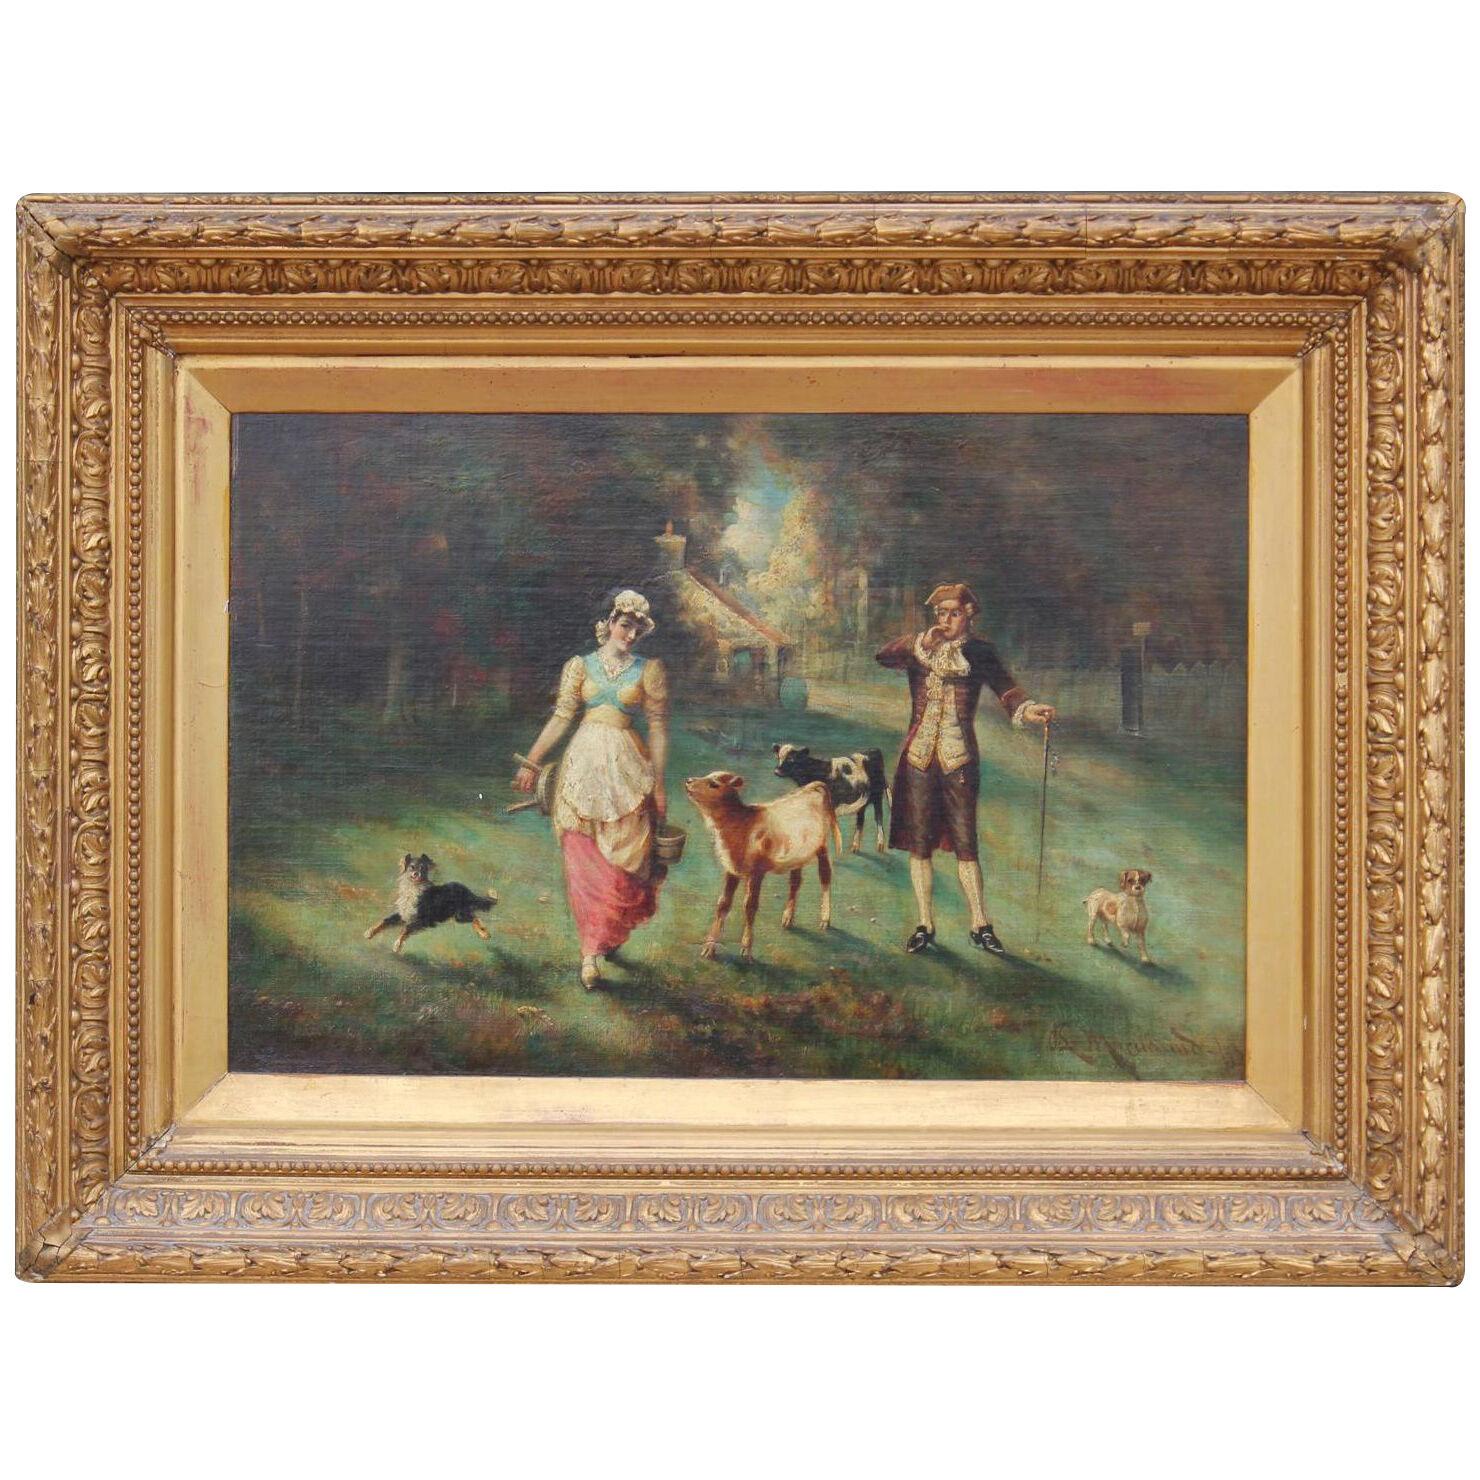 English Country Scene, Milkmaid with Cows and Dog with an Upper Class Male 1895